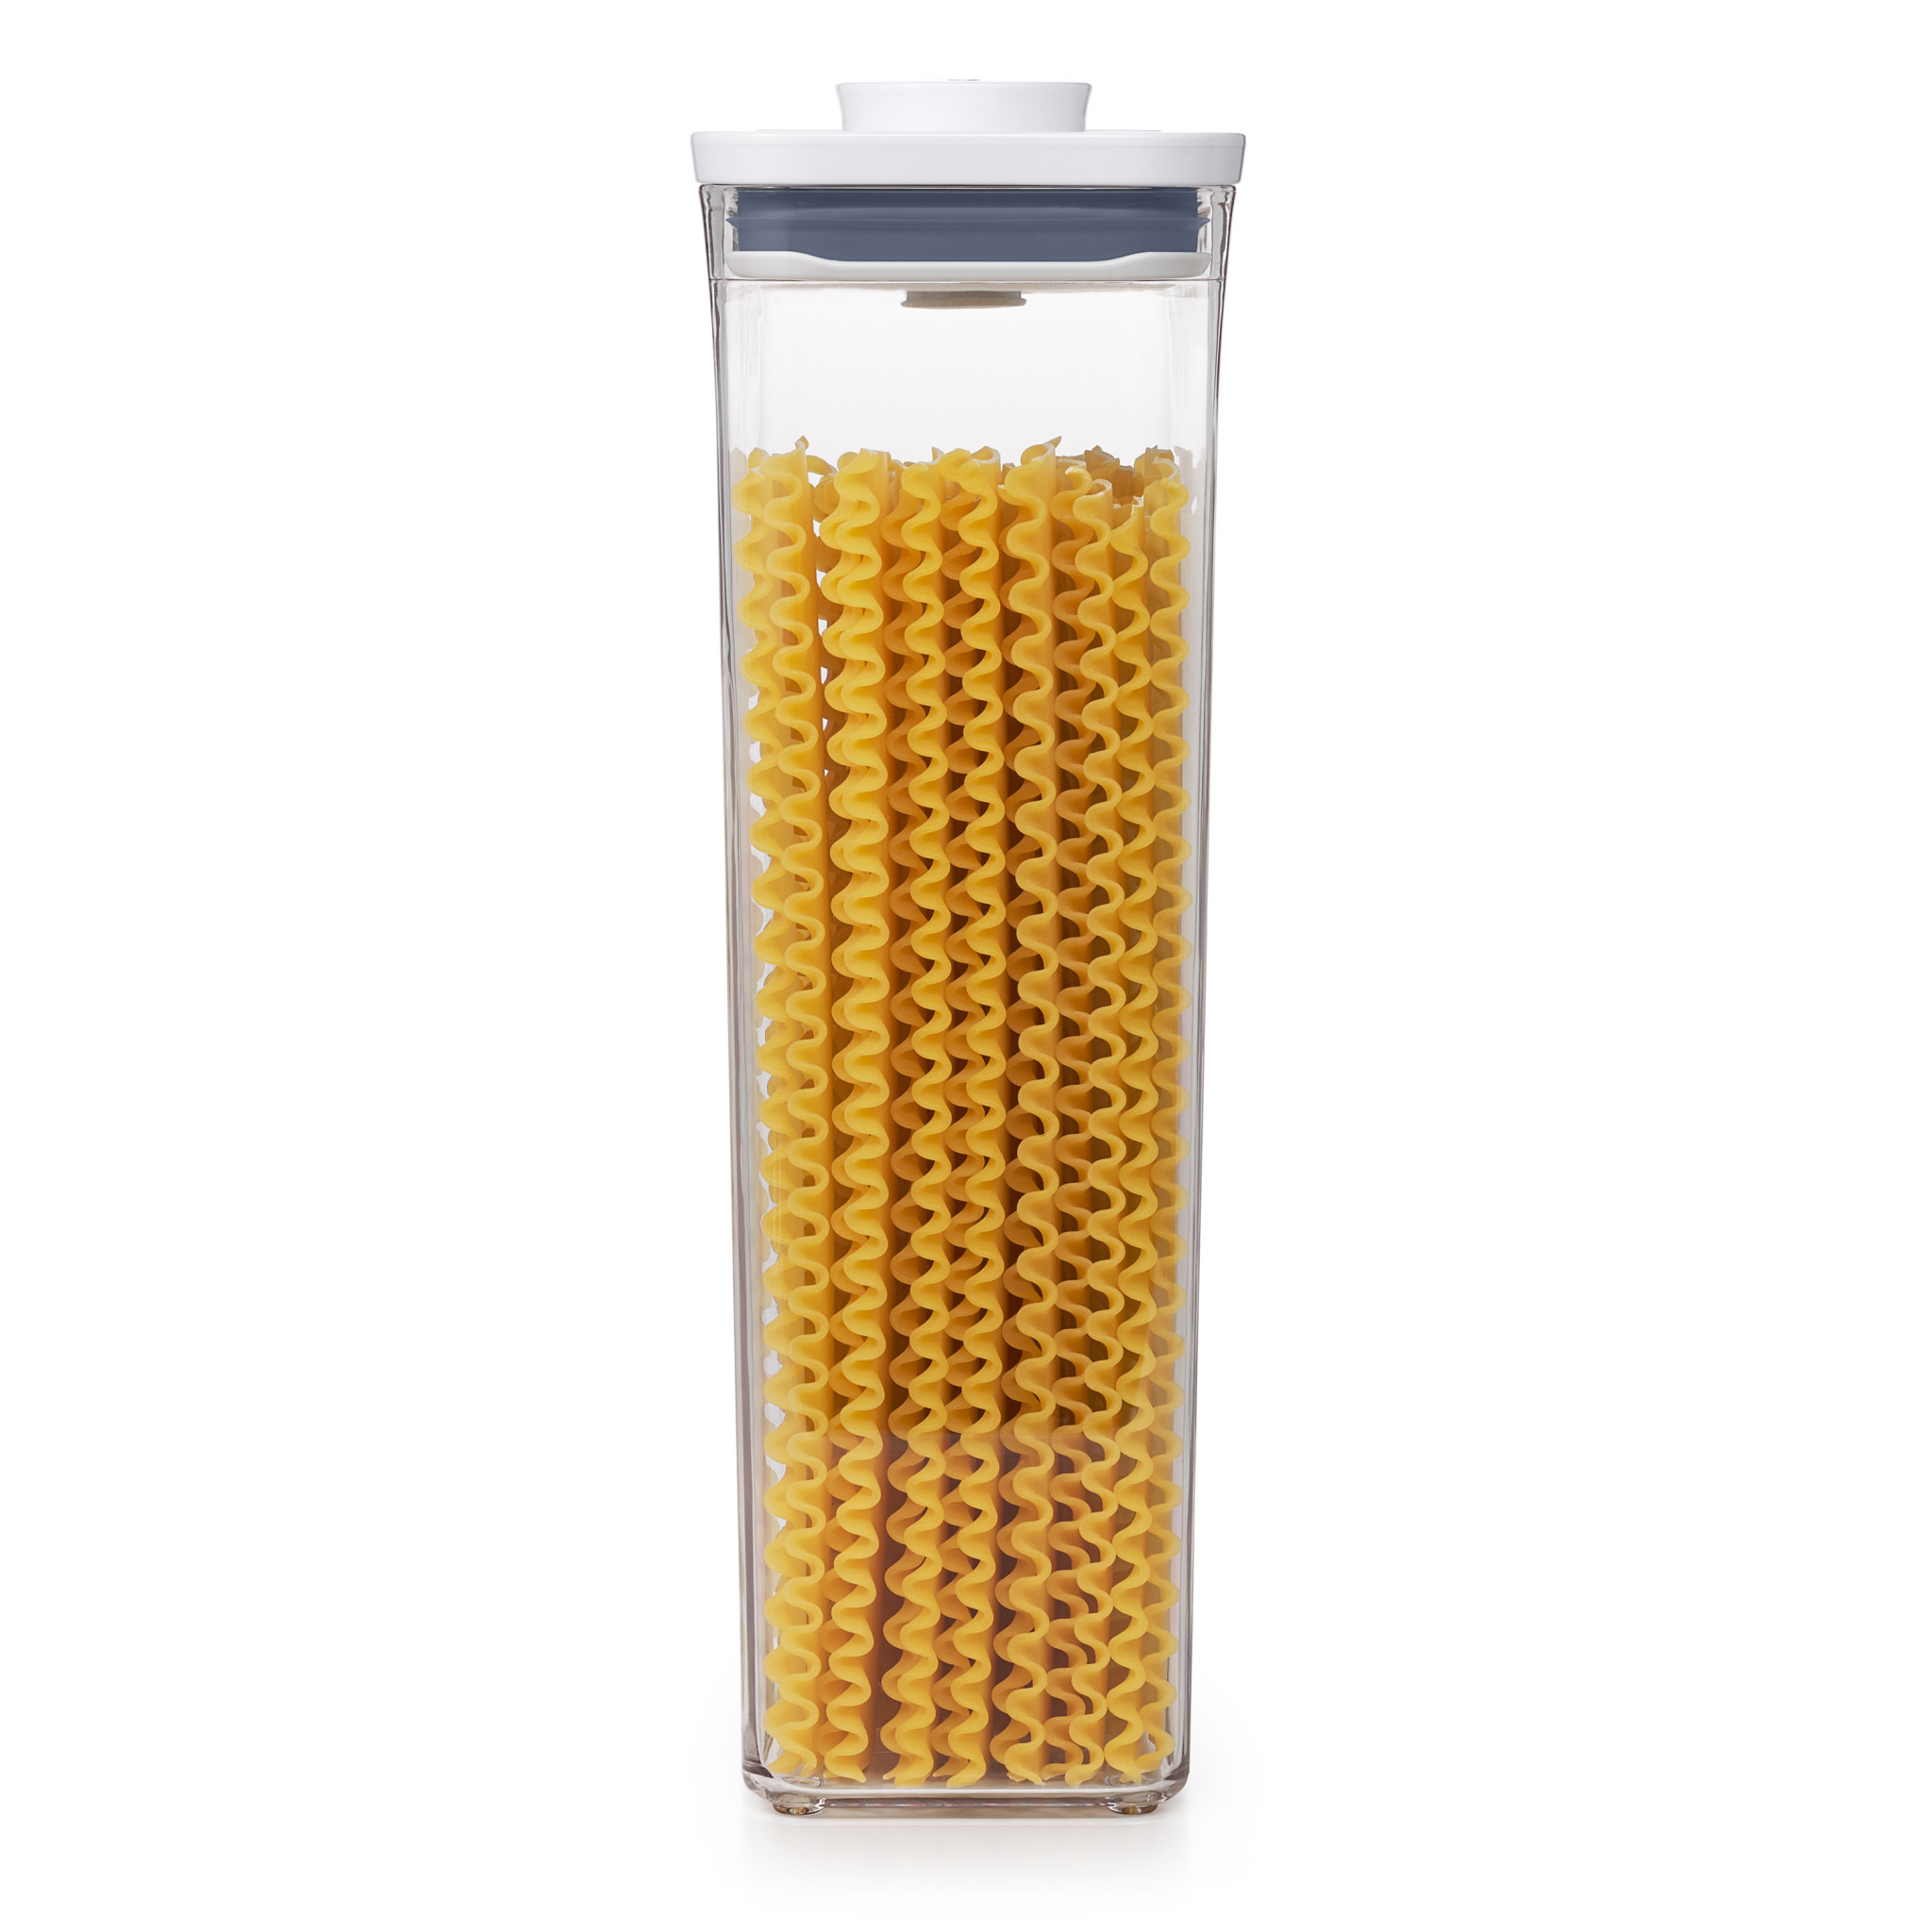 Good Grips POP Food Storage Container, Tall Rectangular, 3.7 Qt.